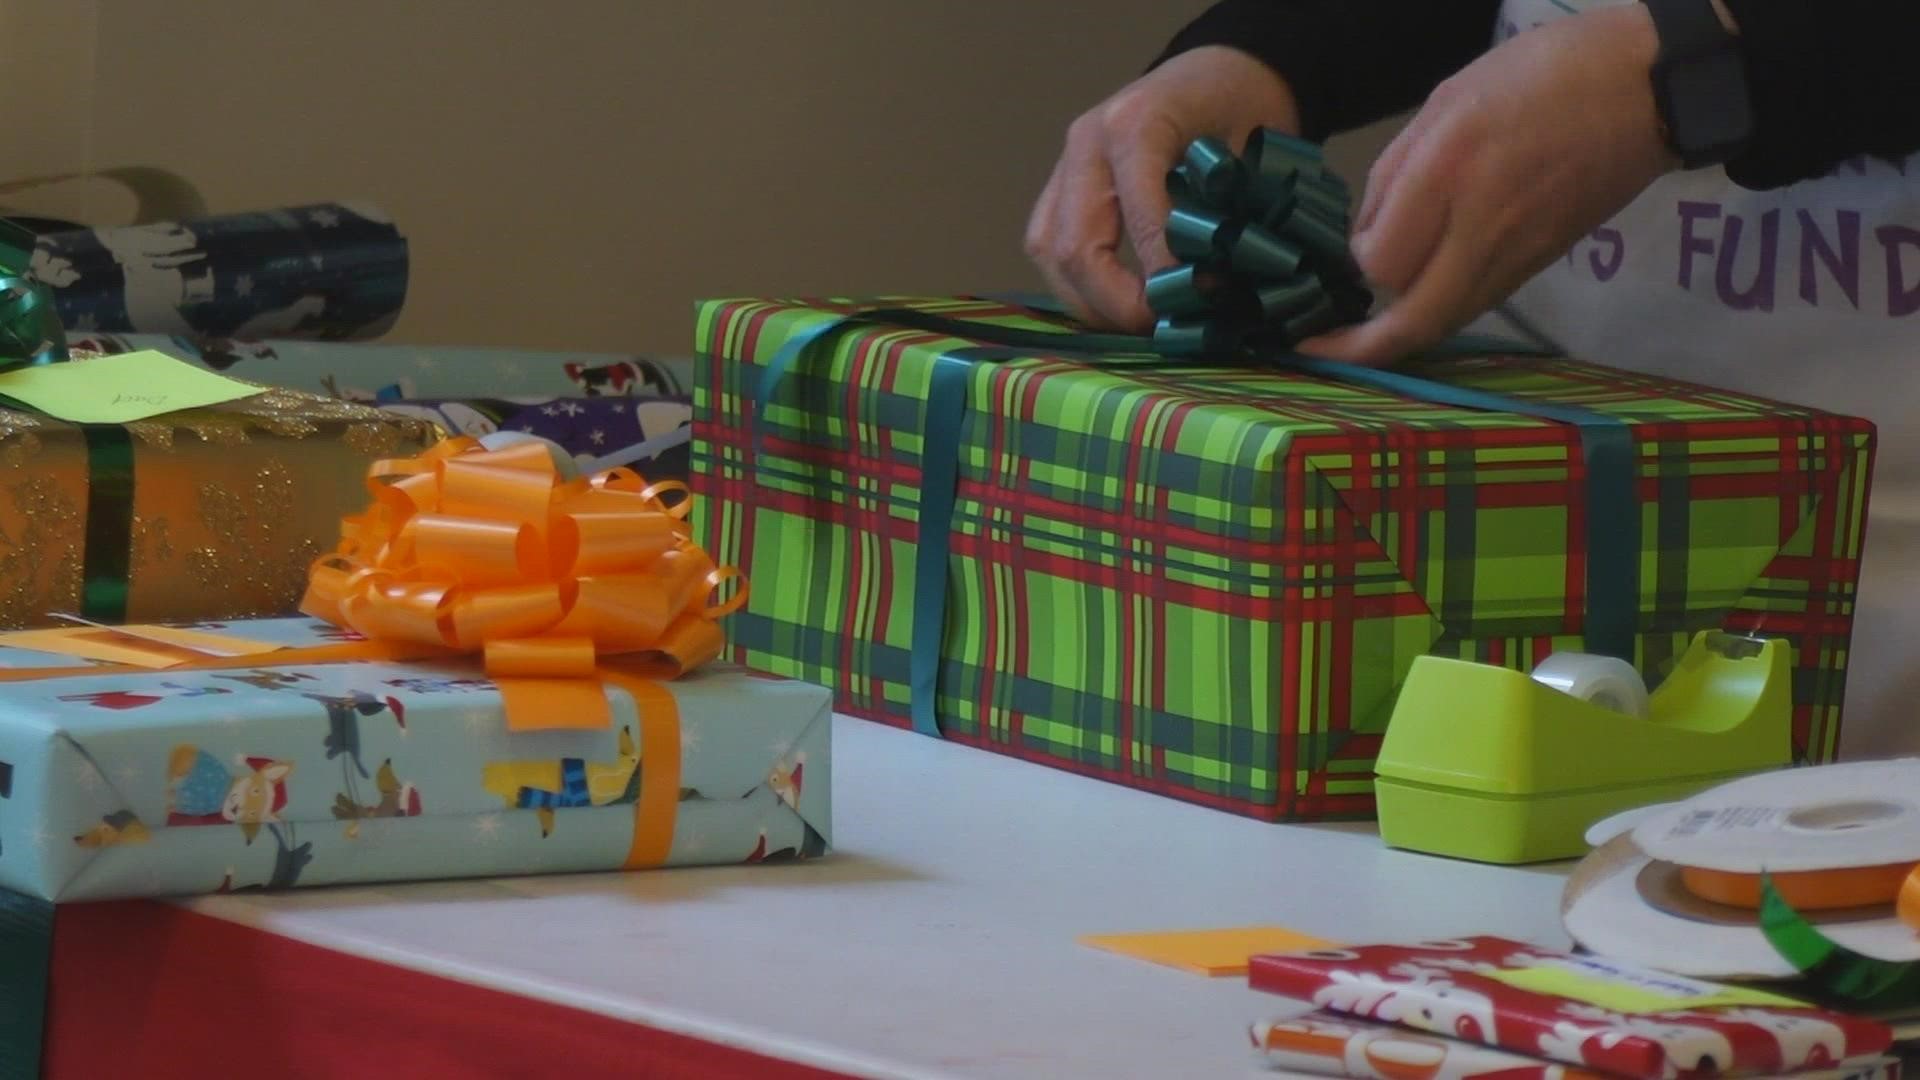 Dreading holiday wrapping? In exchange for a donation benefitting The Forgotten Children's Fund, The Seattle Gift Wrap Project will do it for you.